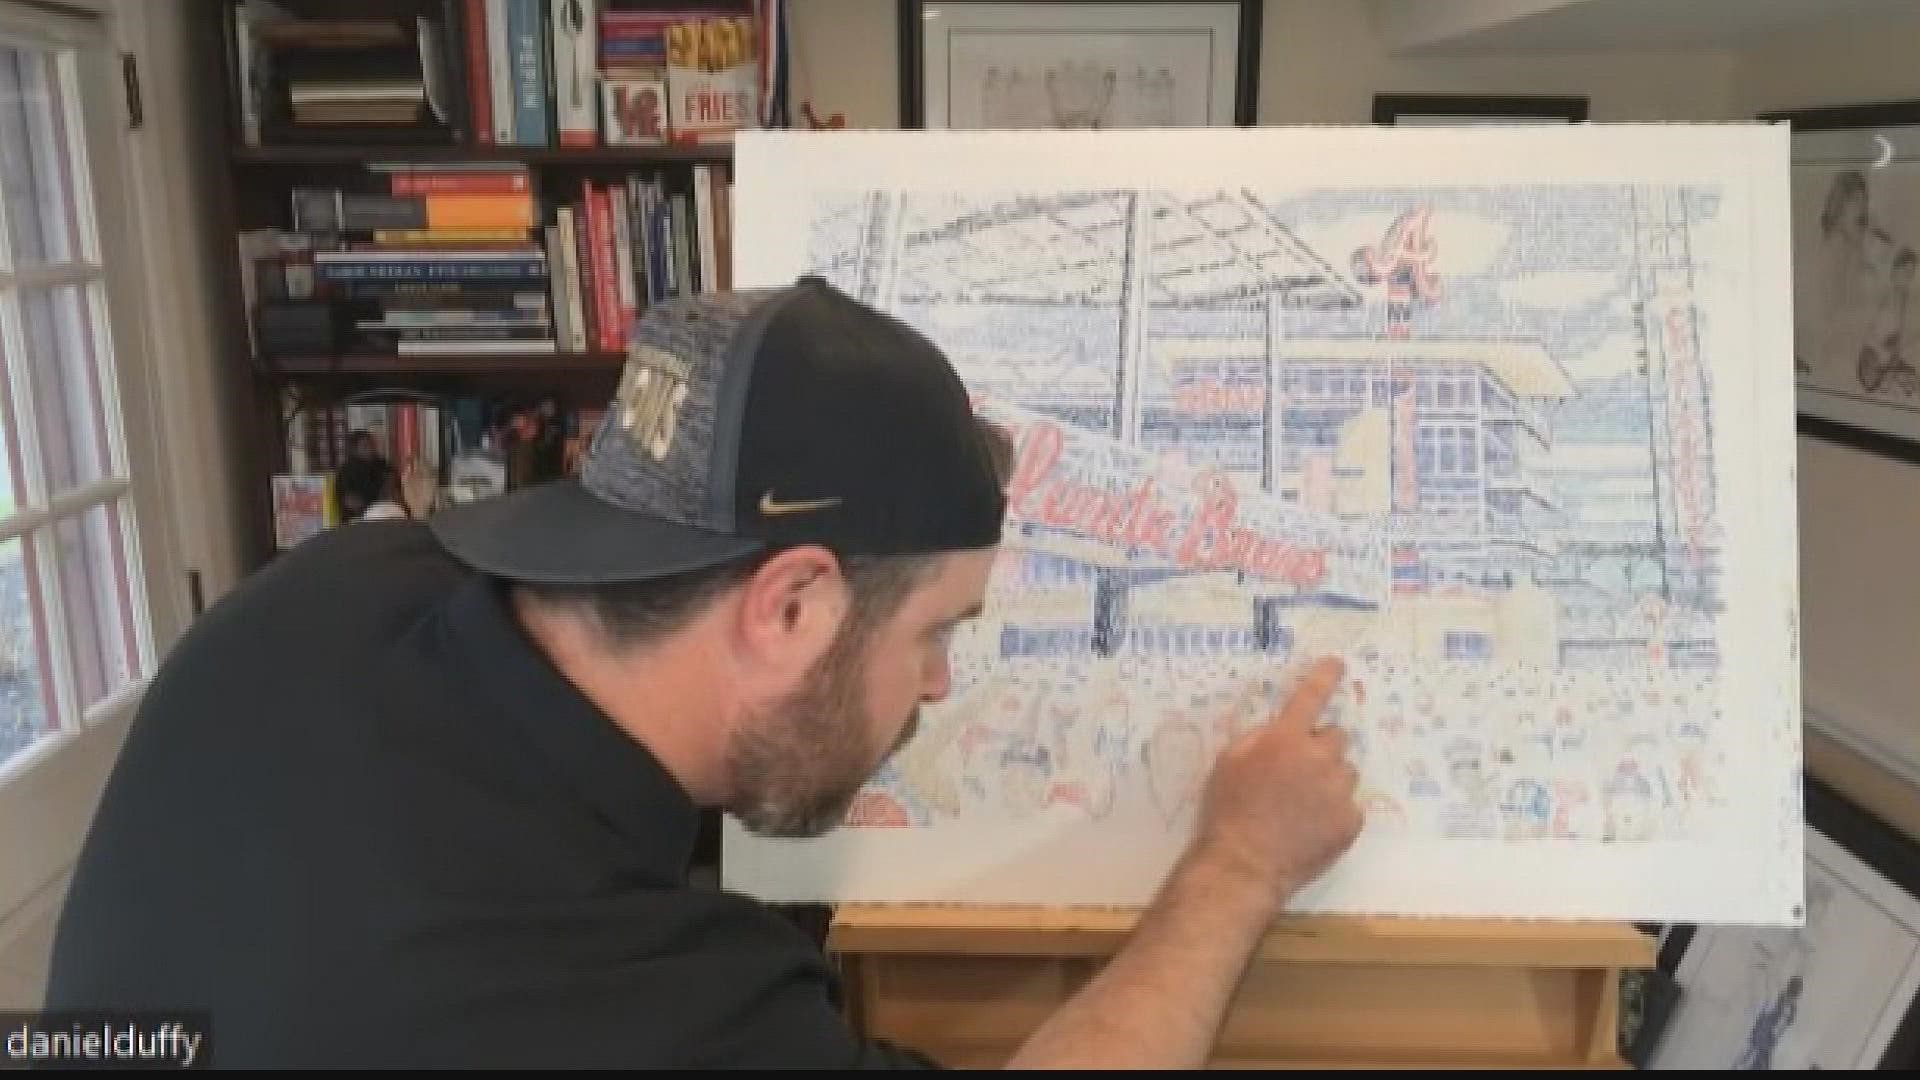 This word artist is commemorating the team and its history.